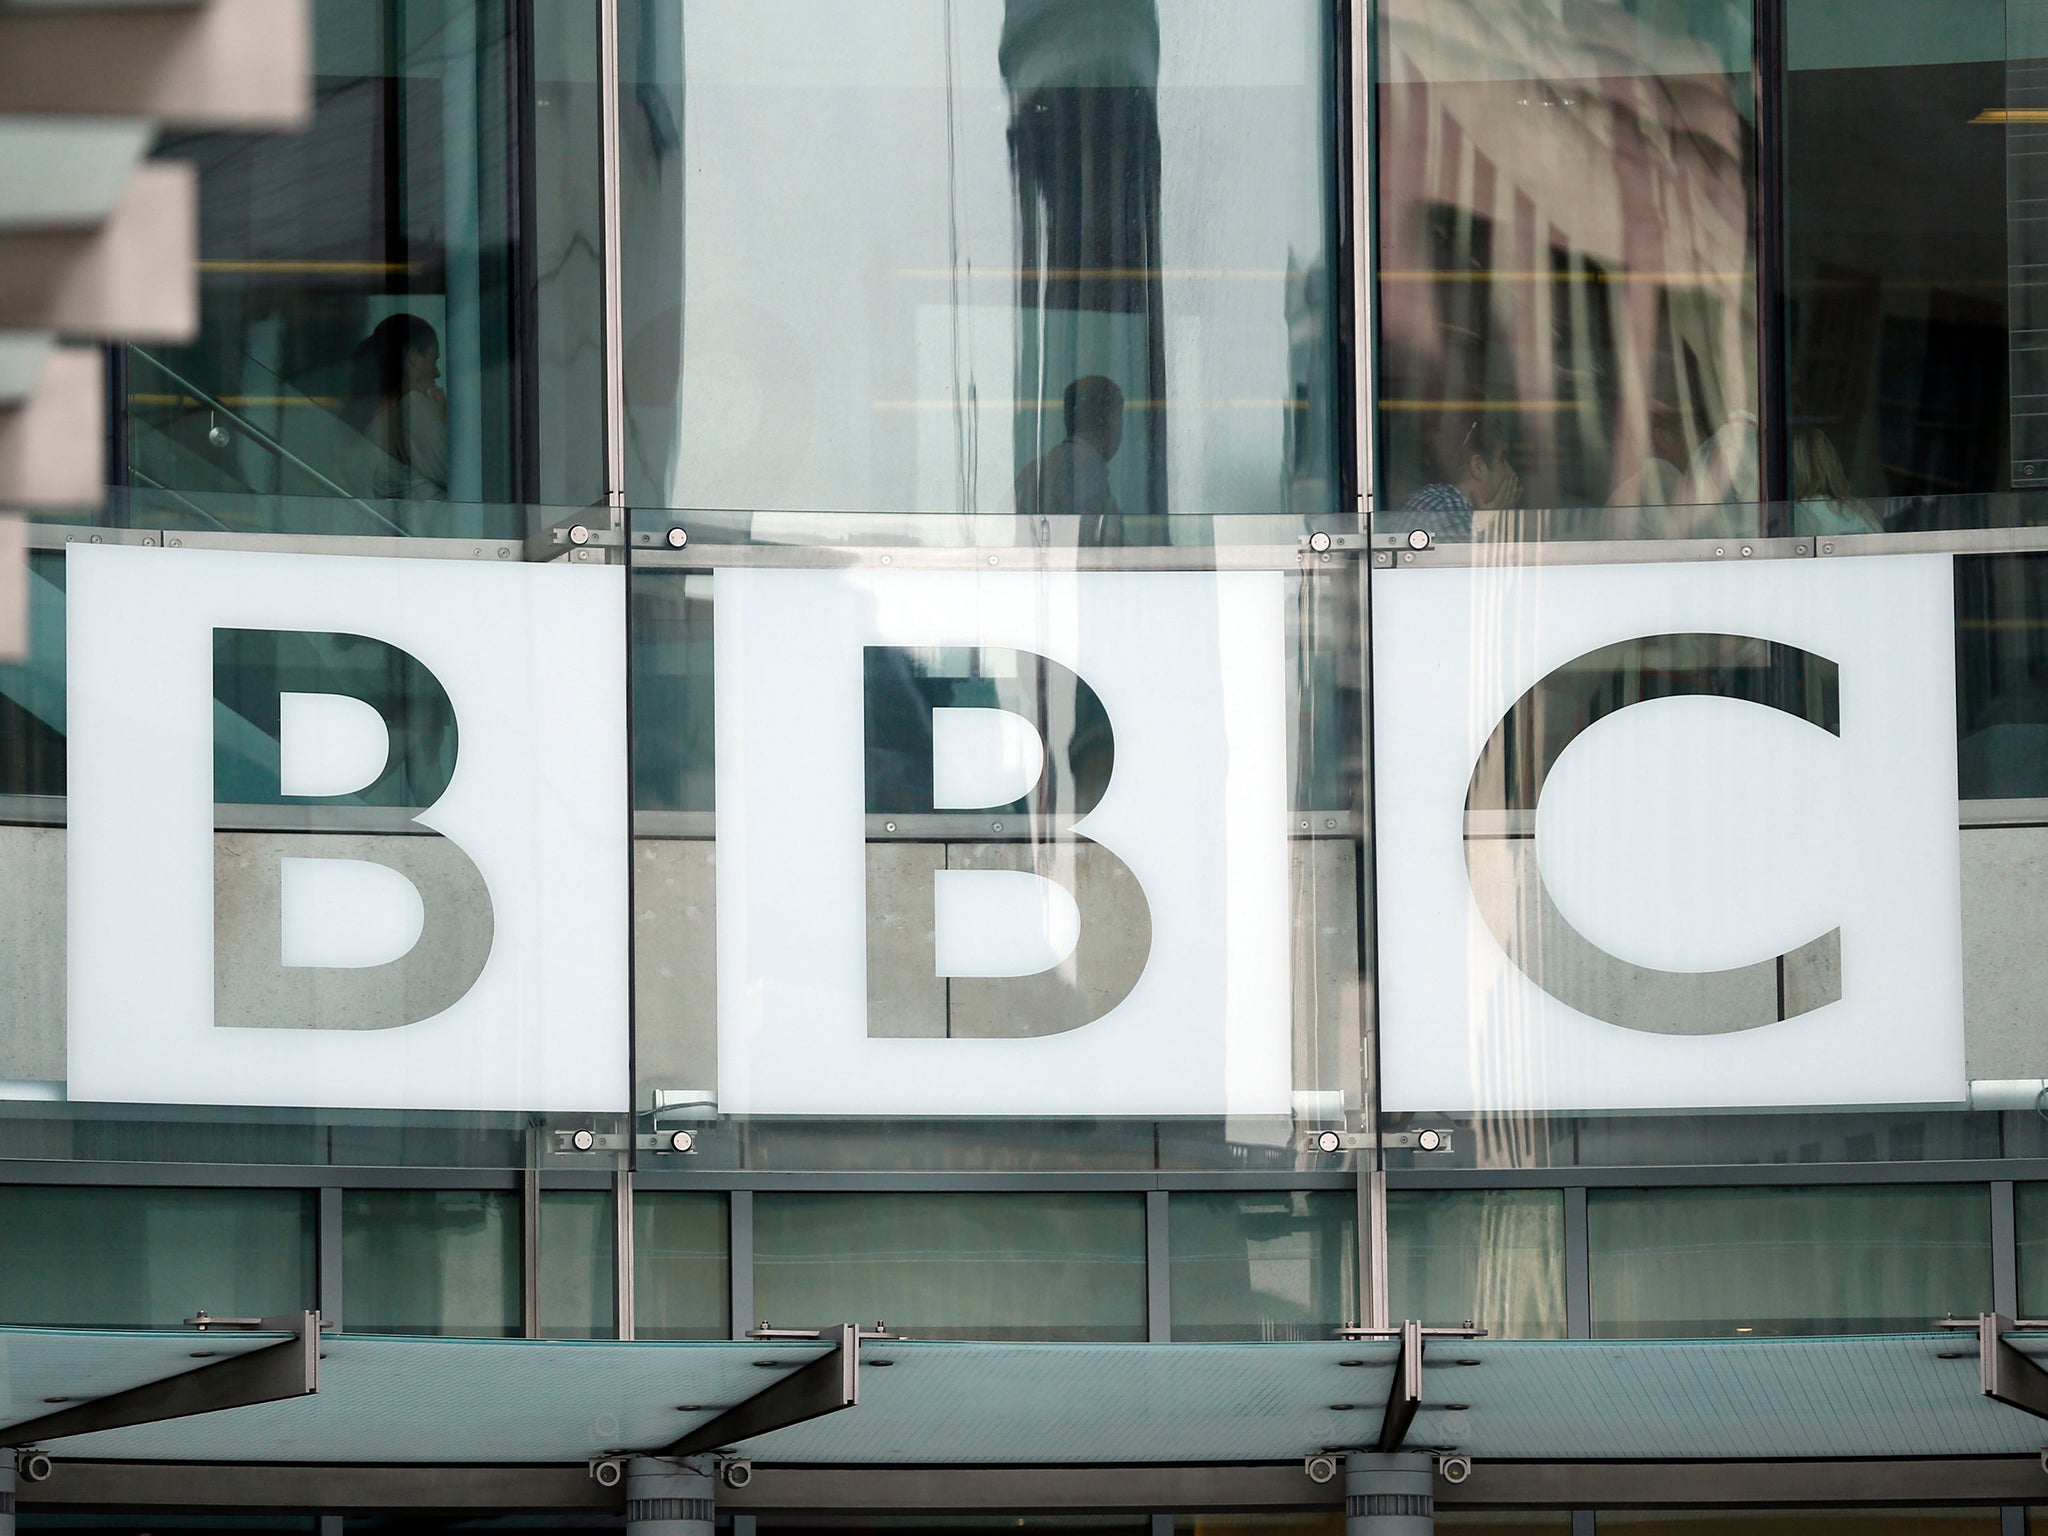 The BBC said it 'regrets' if its social media posts caused offense among readers.